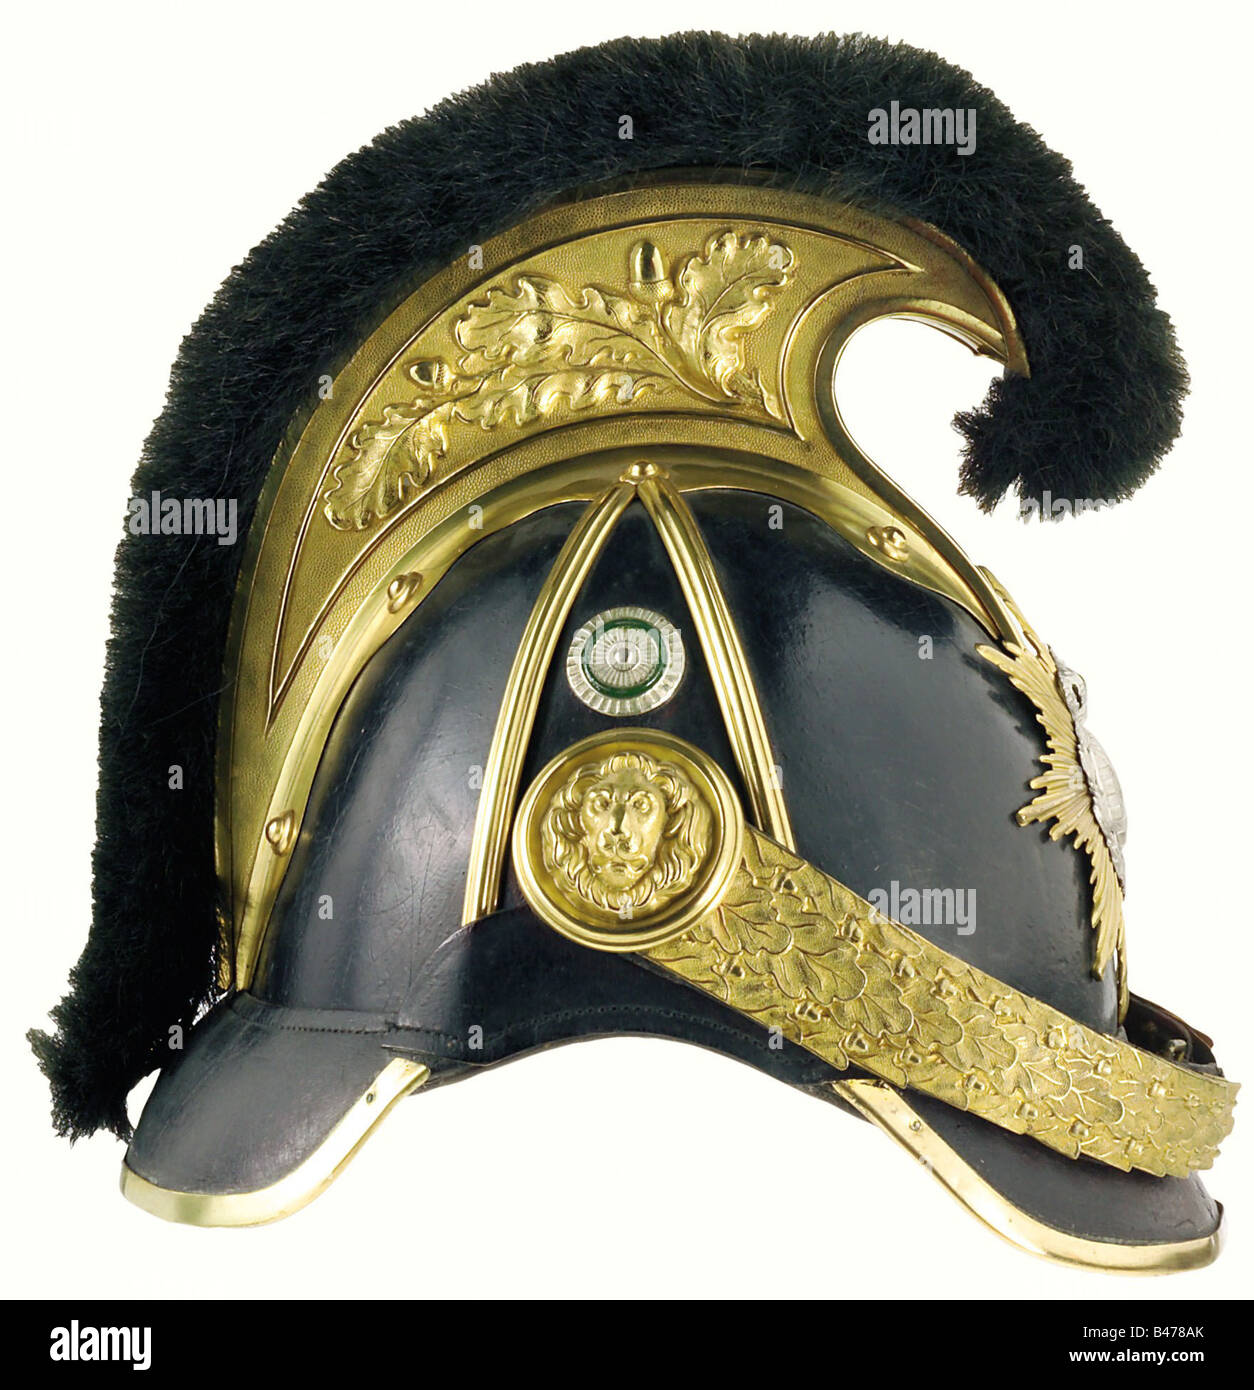 Saxony: A helmet of M 1867 pattern for officers, of heavy cavalry. A leather skull with gilt mountings, topped with a comb with embossed oak leaf ornament. The plate consists of an eight-pointed star overlaid with a coat of arms. Profiled chinscales are secured to lion's head side bosses, a state cockade is rivetted to the right side. On the inside, the sweatband shows some signs of ageing. Size 56. A rare helmet in an excellent state of preservation. historic, historical, 19th century, helmet, helmets, headgear, headgears, protection, protective, uniform, unif, Stock Photo